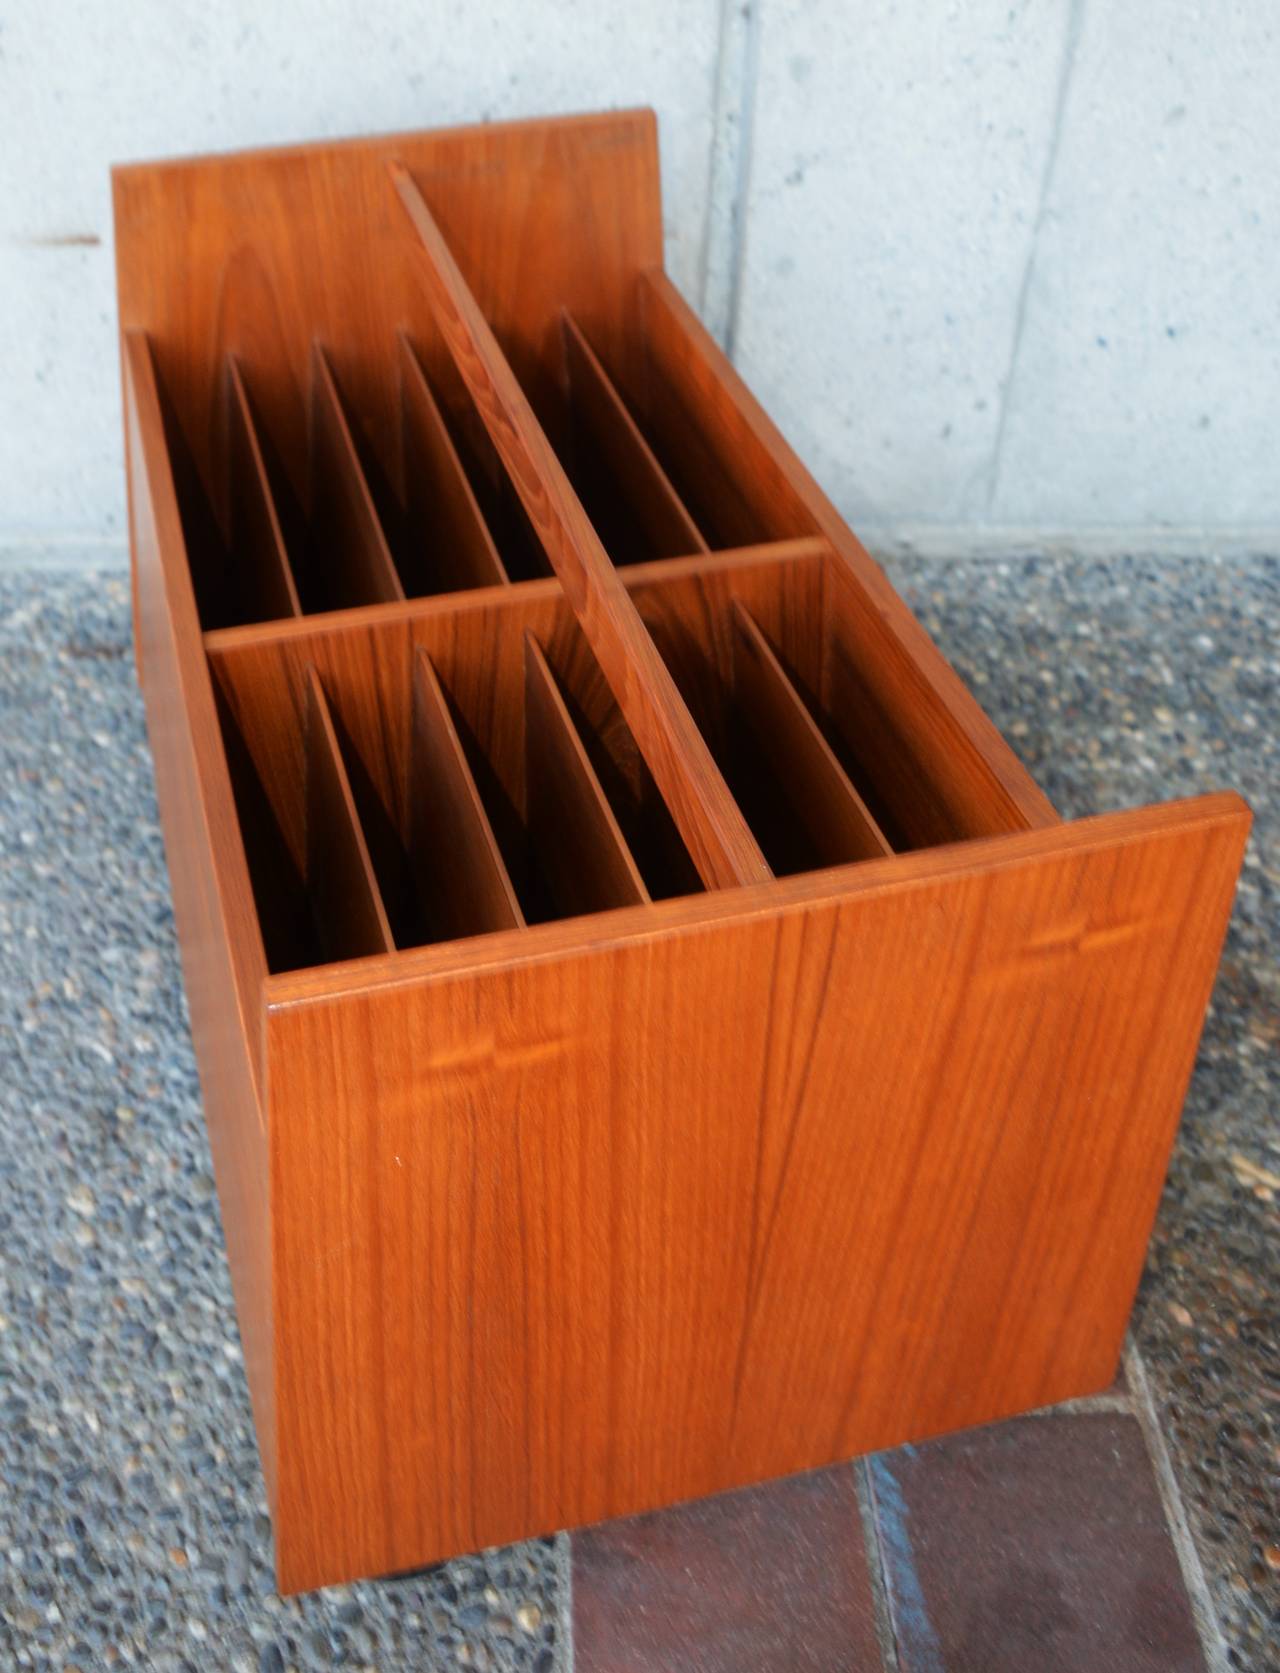 This Danish modern teak storage cart is the super rare double wide version, made by Rolf Hesland for Bruskbo. Featuring an overall trapezoidal shape that tapers upwards, generous slots for vinyl, magazines, or office filing, with a handy handle and